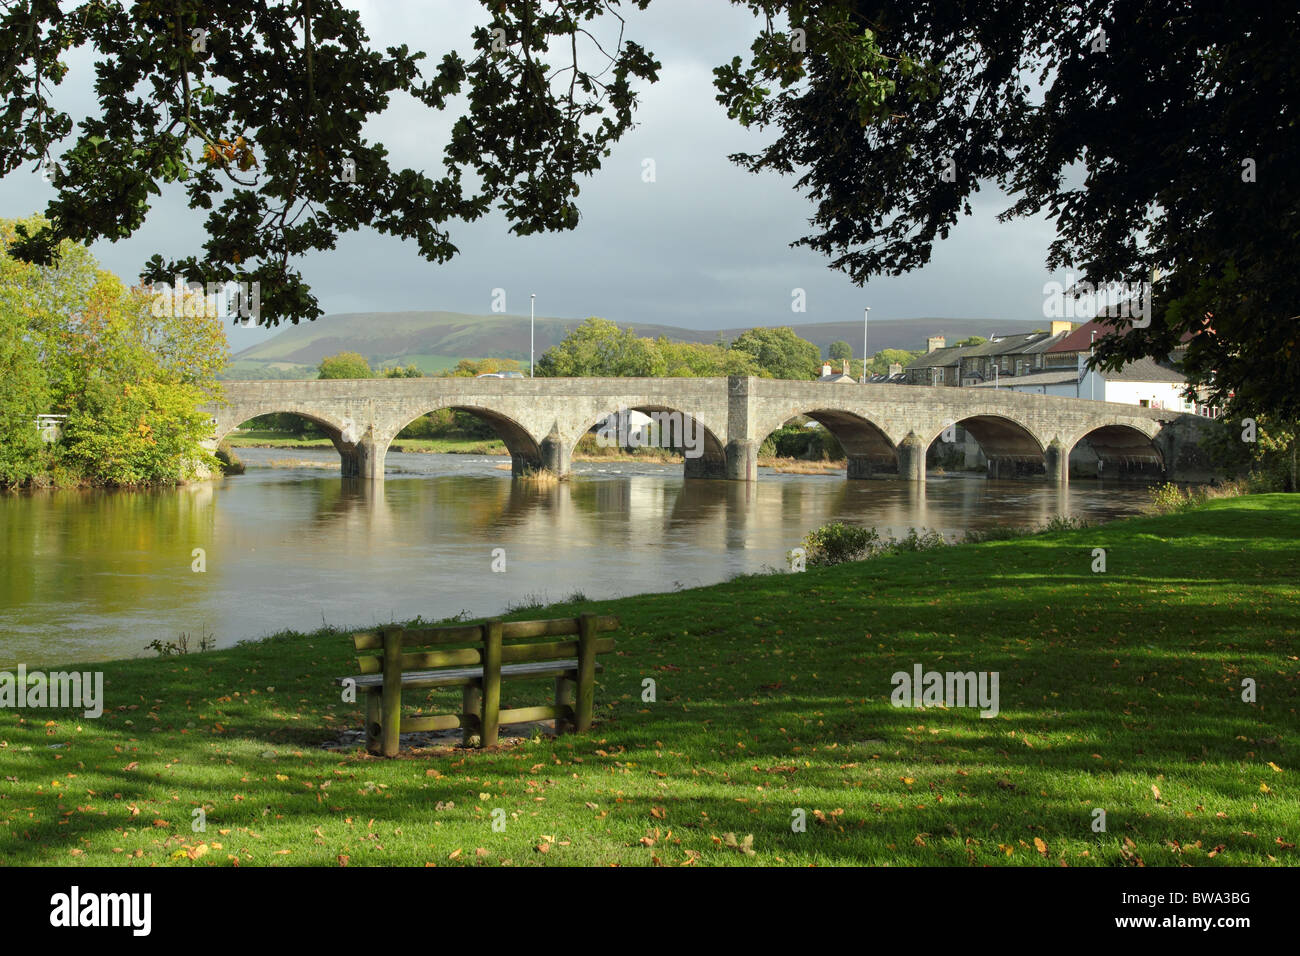 Ponte sul fiume Wye a Builth Wells, Wales UK. Foto Stock